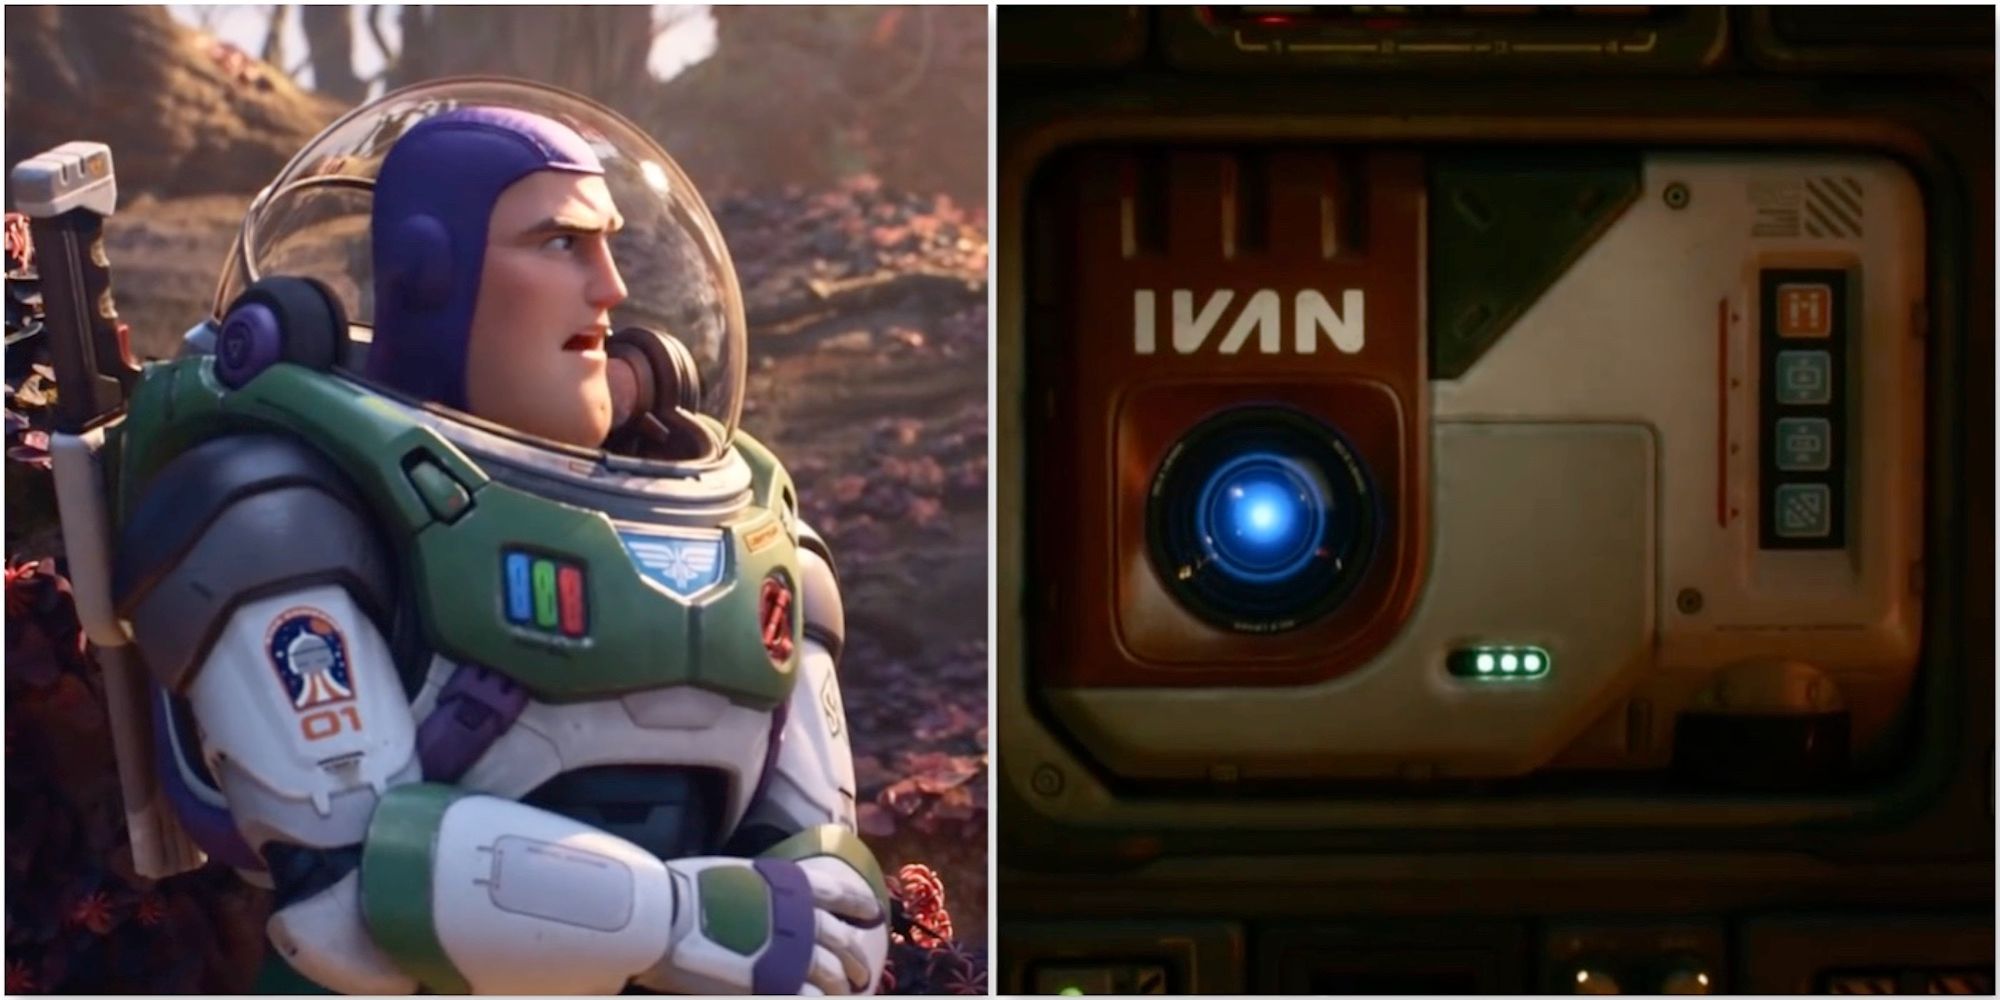 Buzz and IVAN from Lightyear